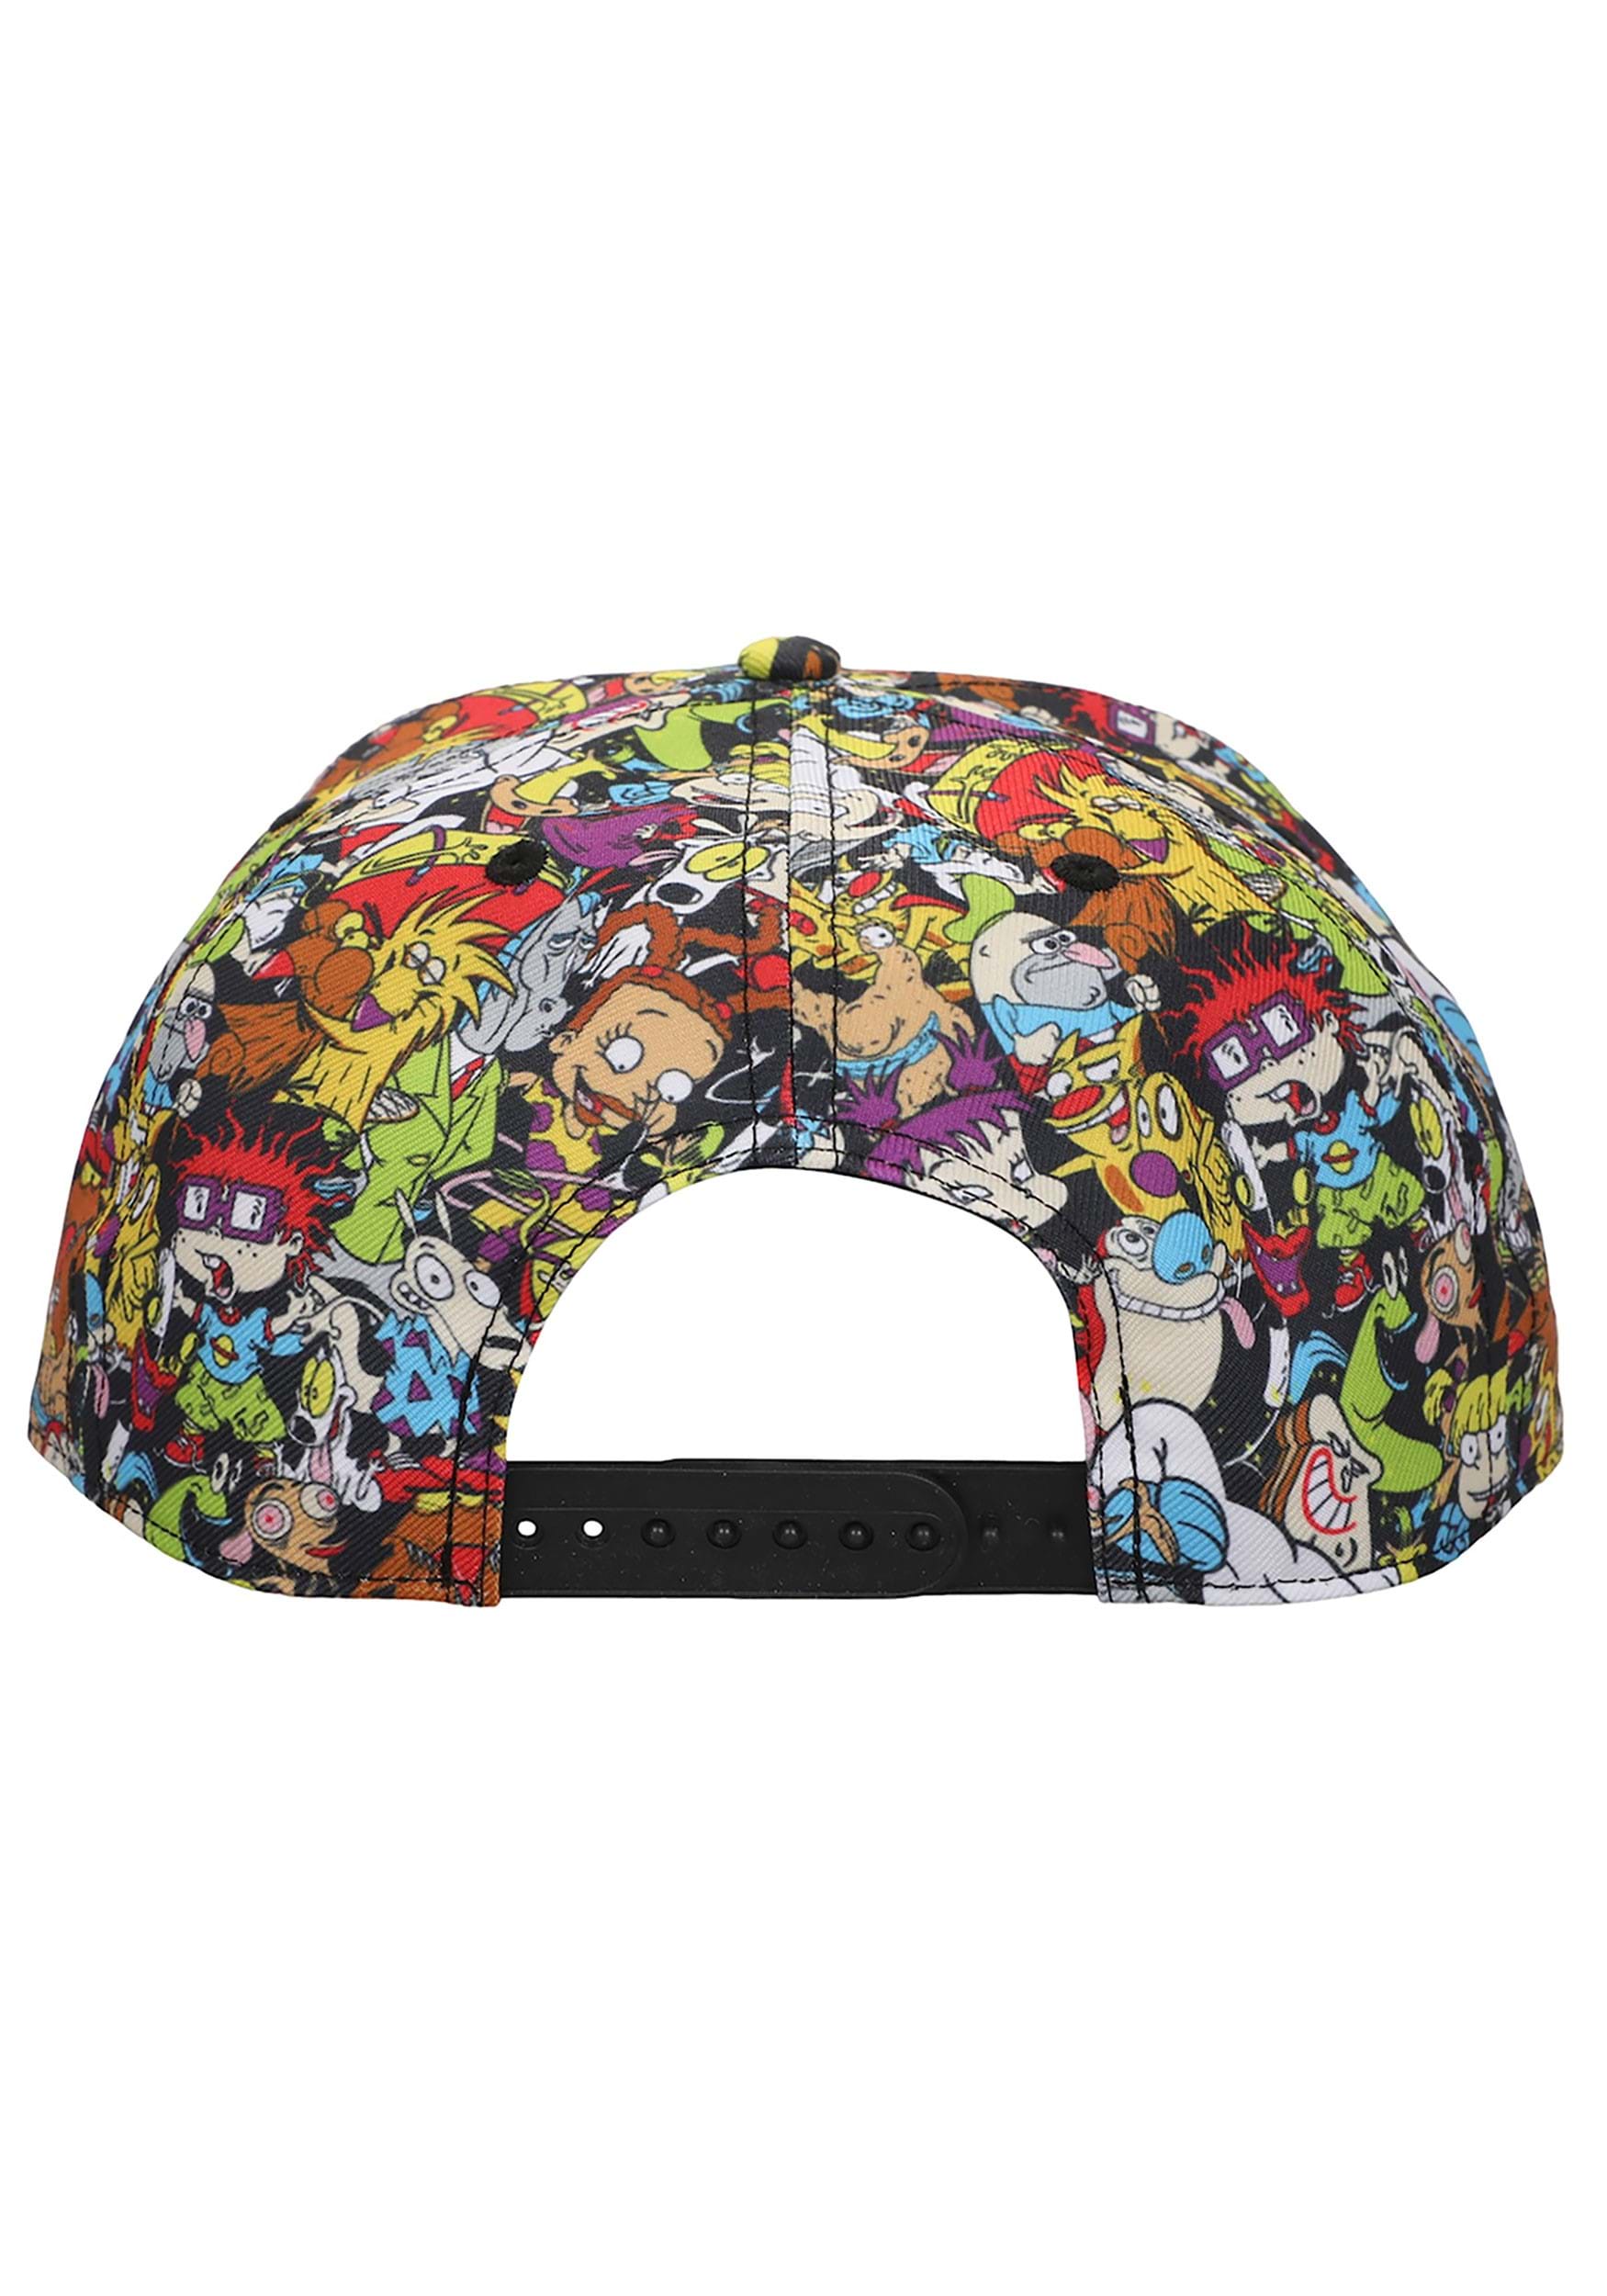 https://images.fun.com/products/90938/2-1-273025/nick-90s-multi-character-hat-alt-2.jpg